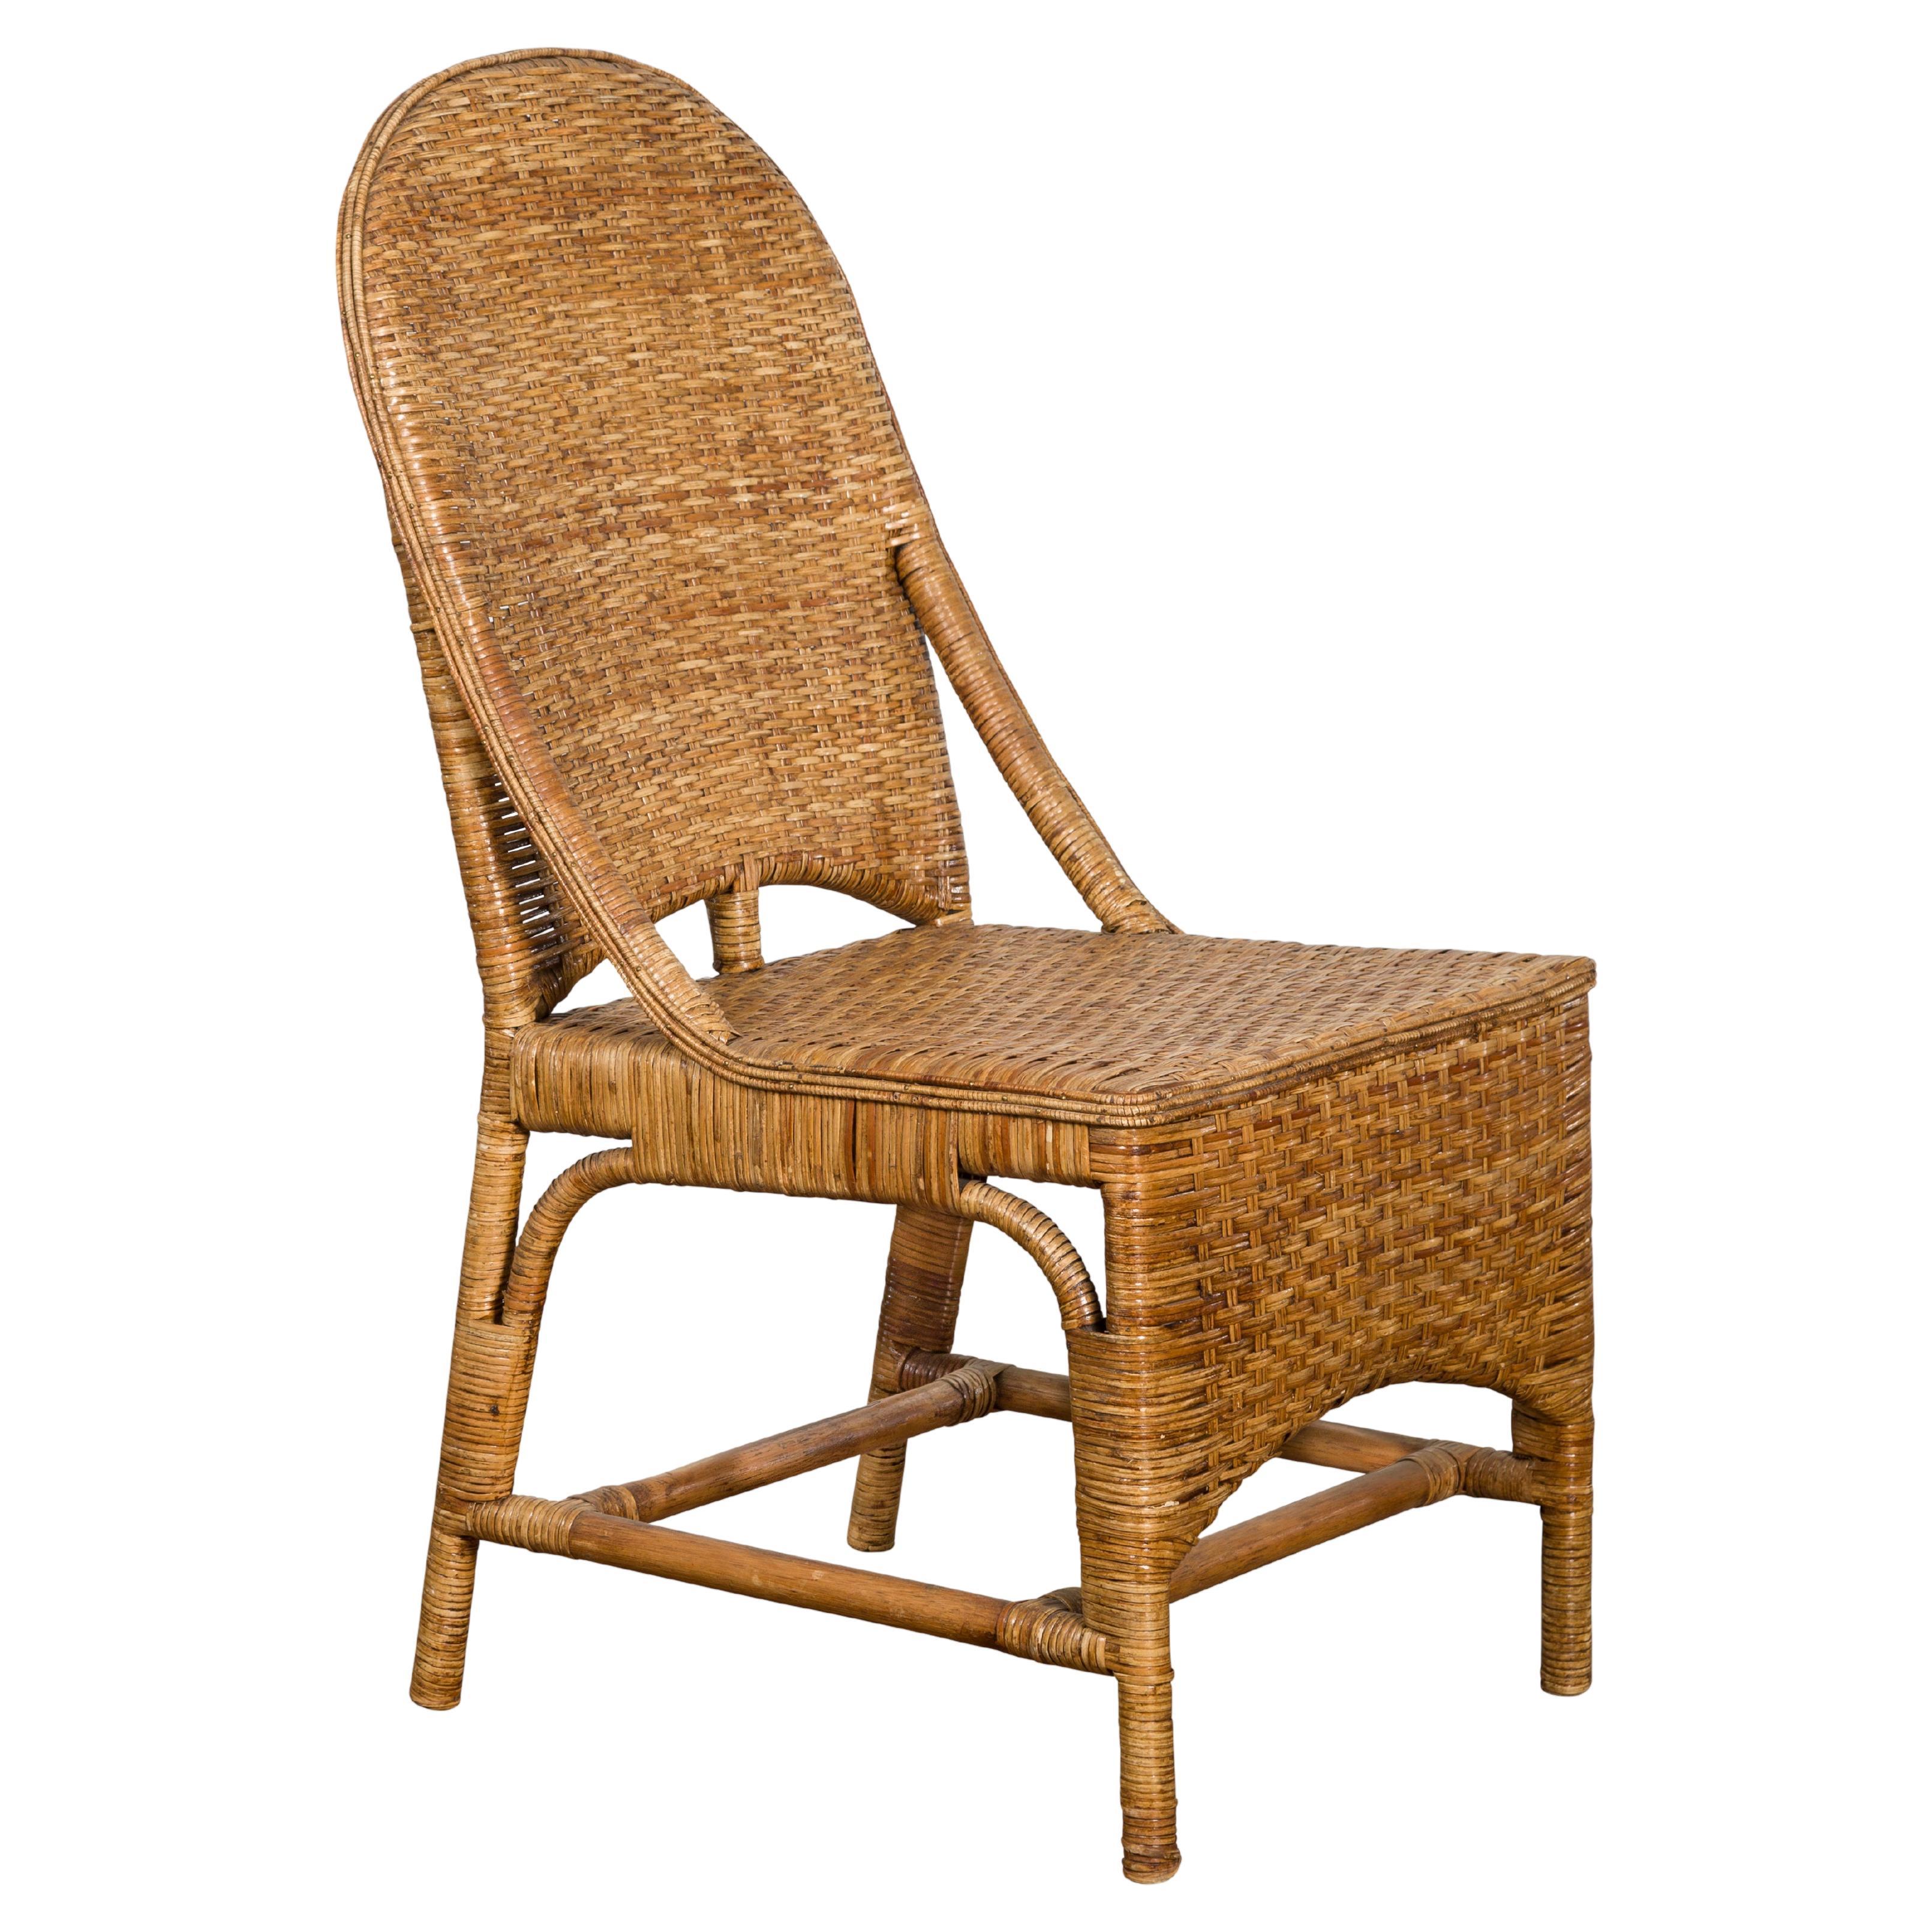 Vintage Rattan Chair with Slanted Back & Long Front Skir